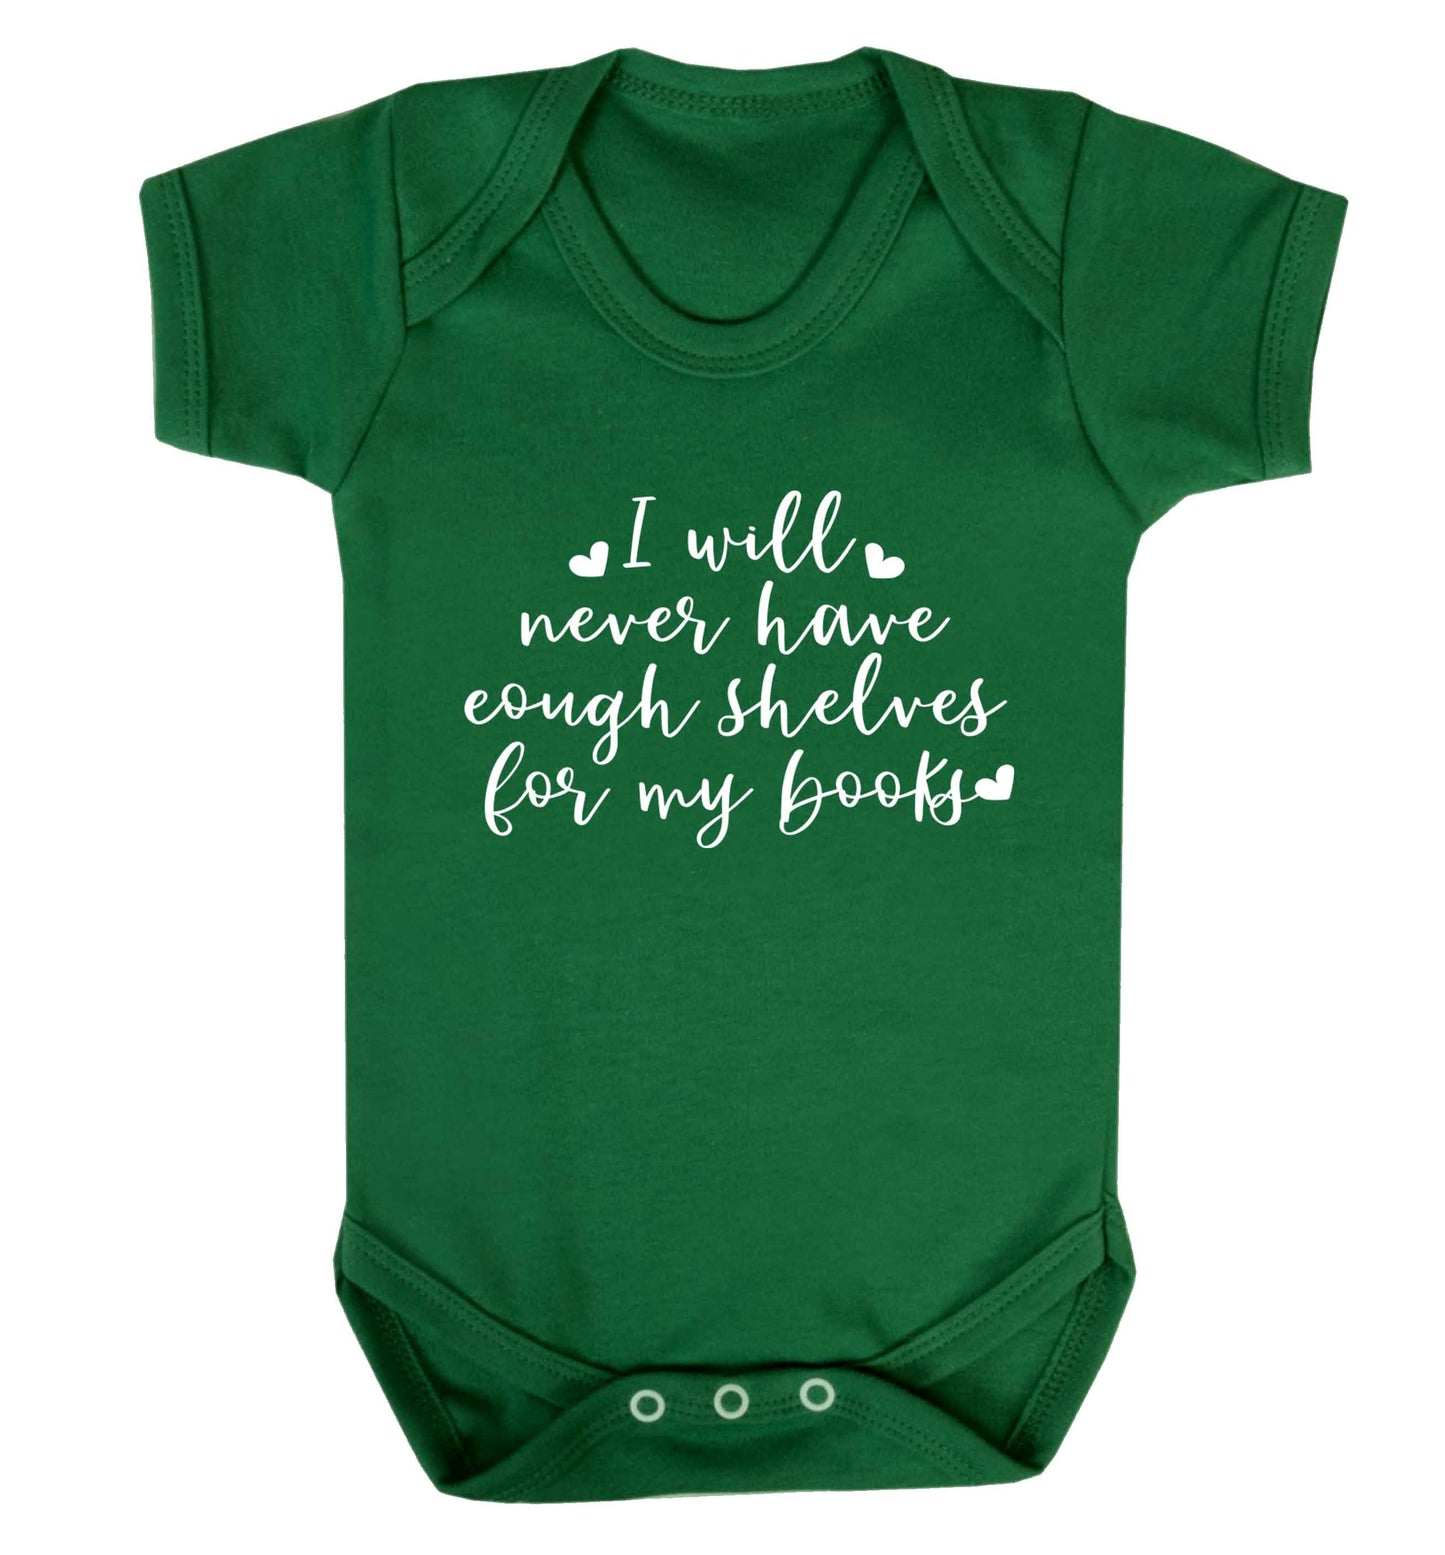 I will never have enough shelves for my books Baby Vest green 18-24 months